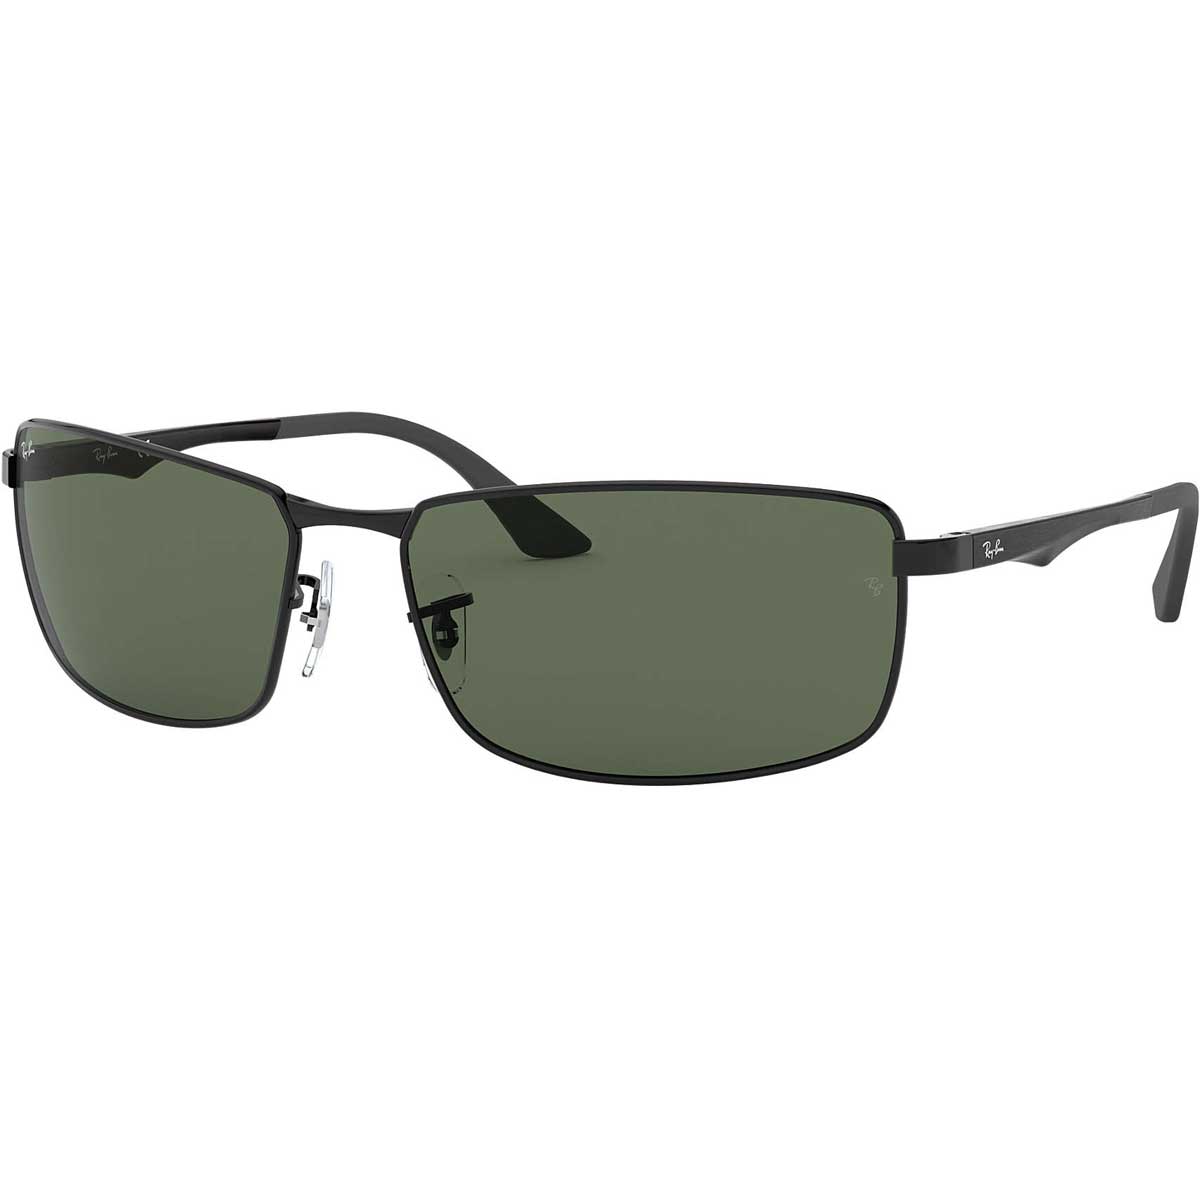 Ray-Ban RB3498 Men's Wireframe Sunglasses-0RB3498002/7161